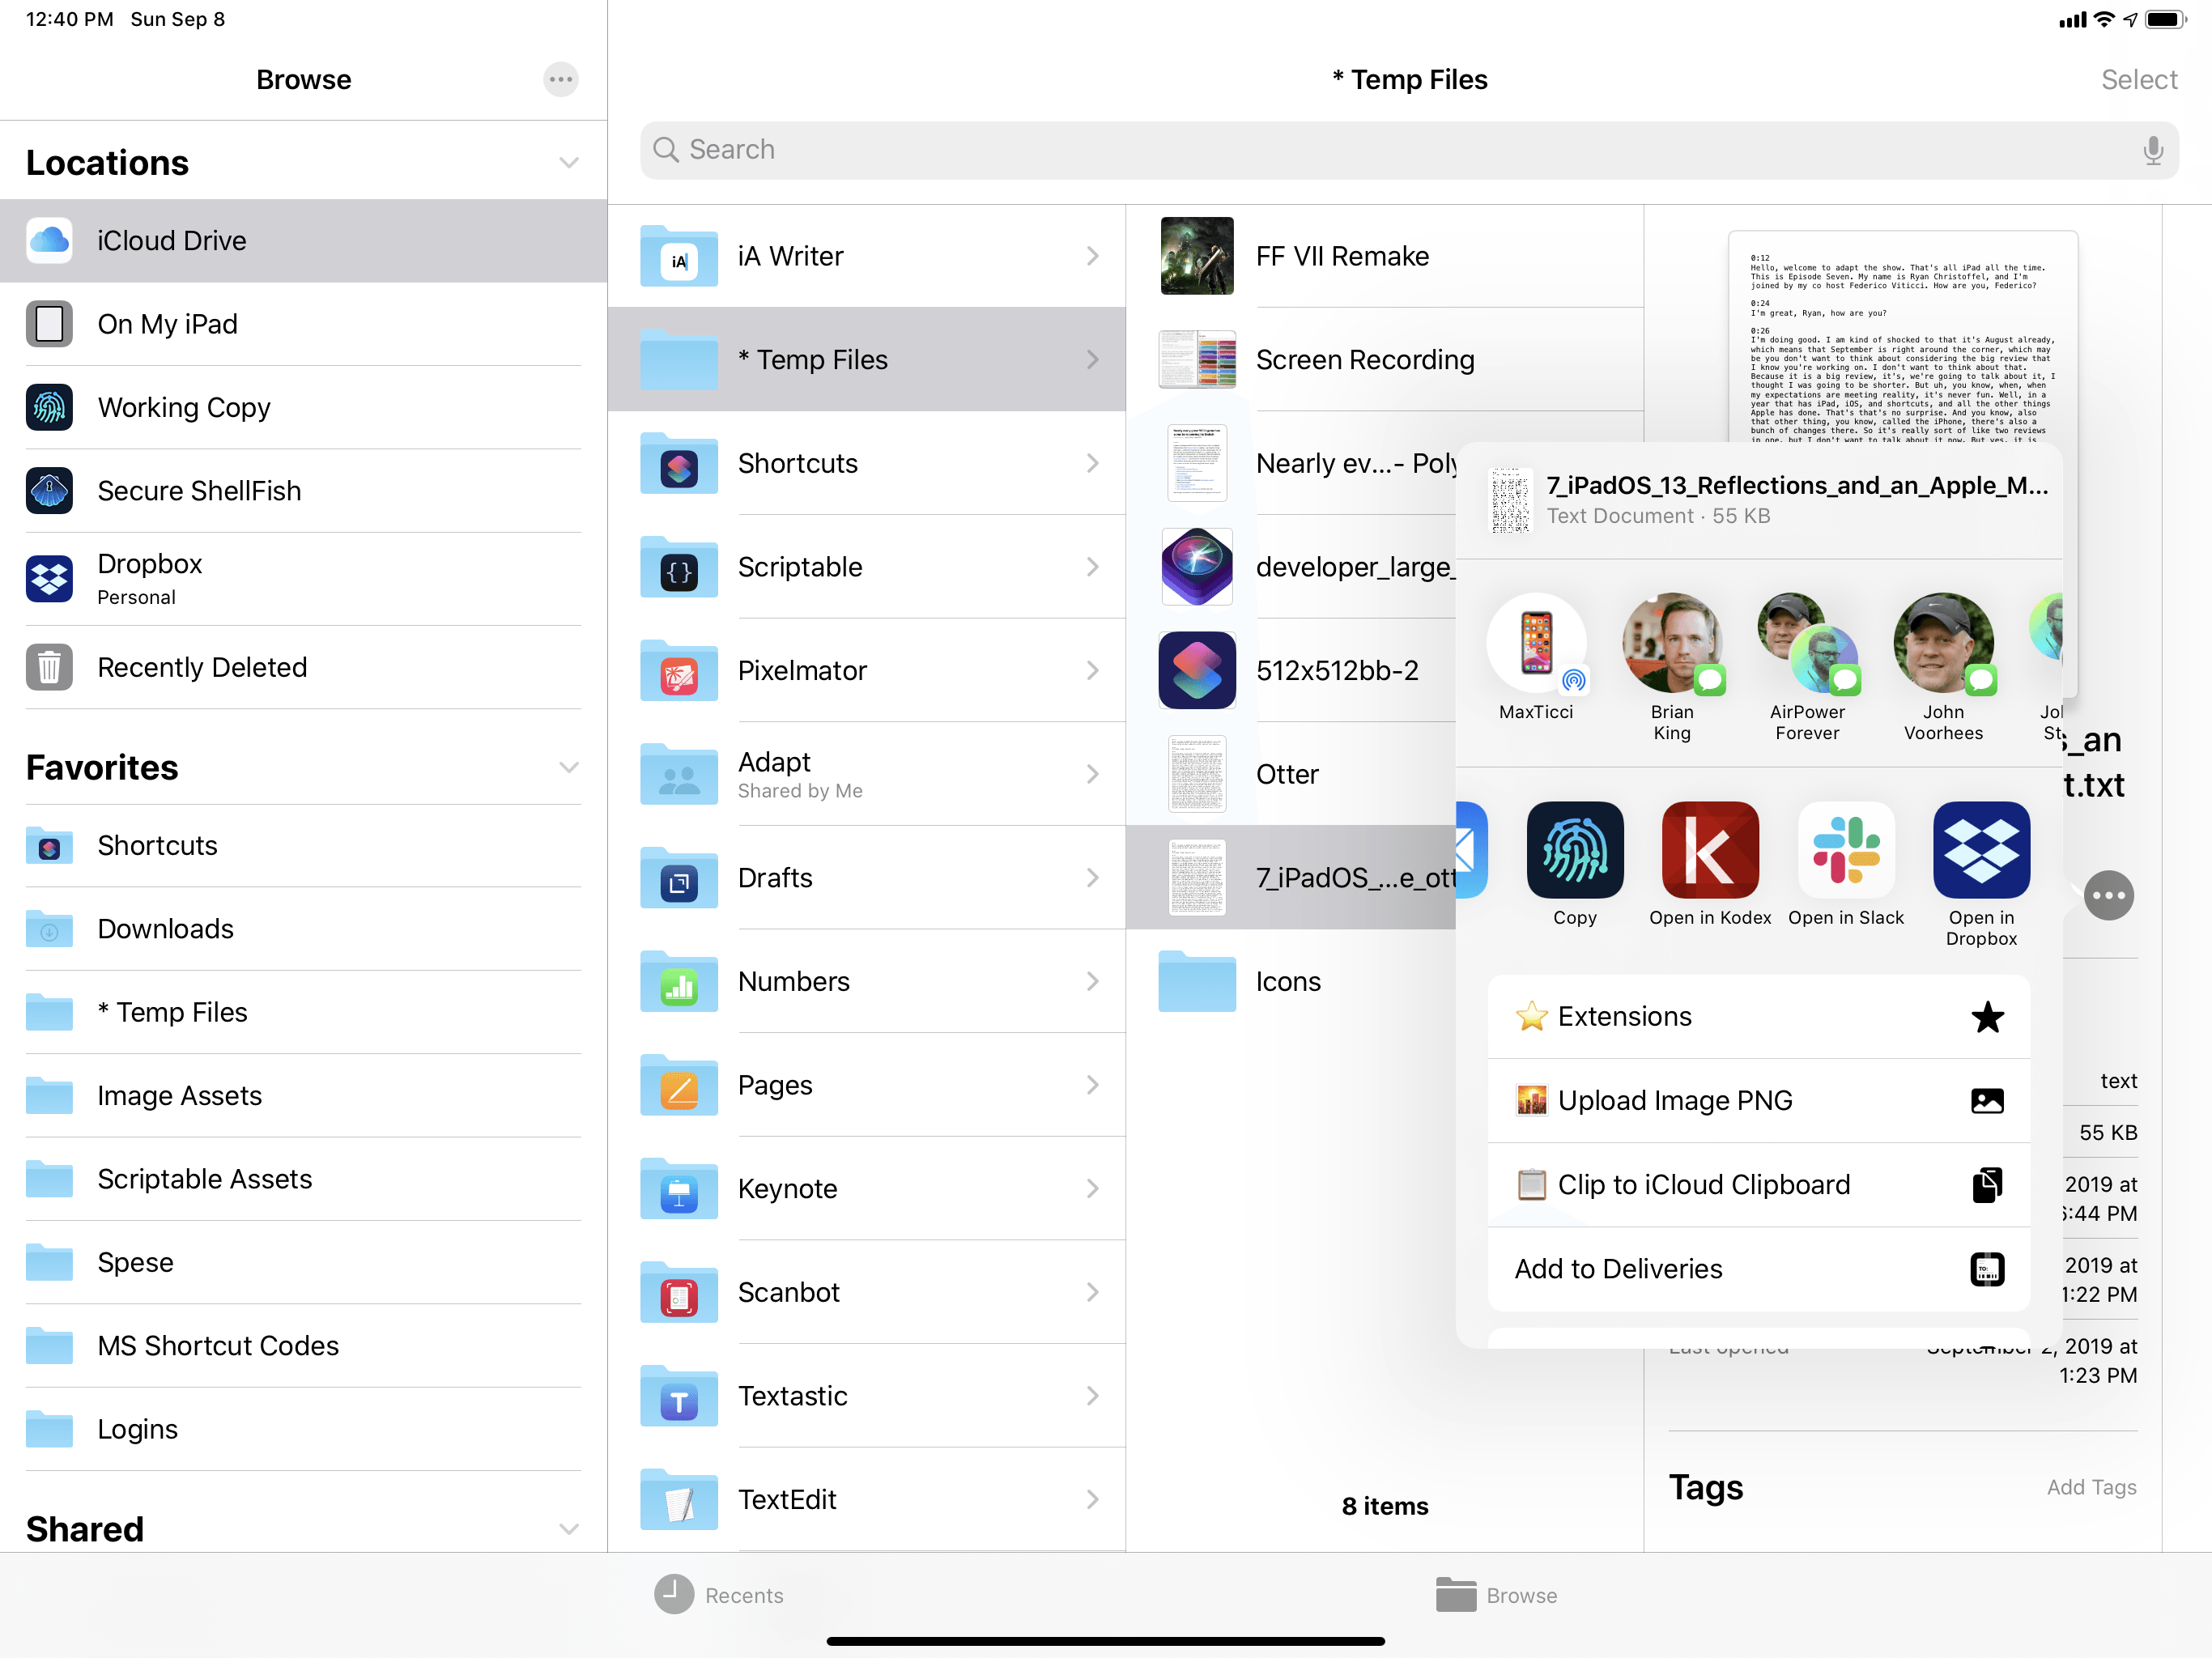 You still need to go through the share sheet to open a selected file in apps.